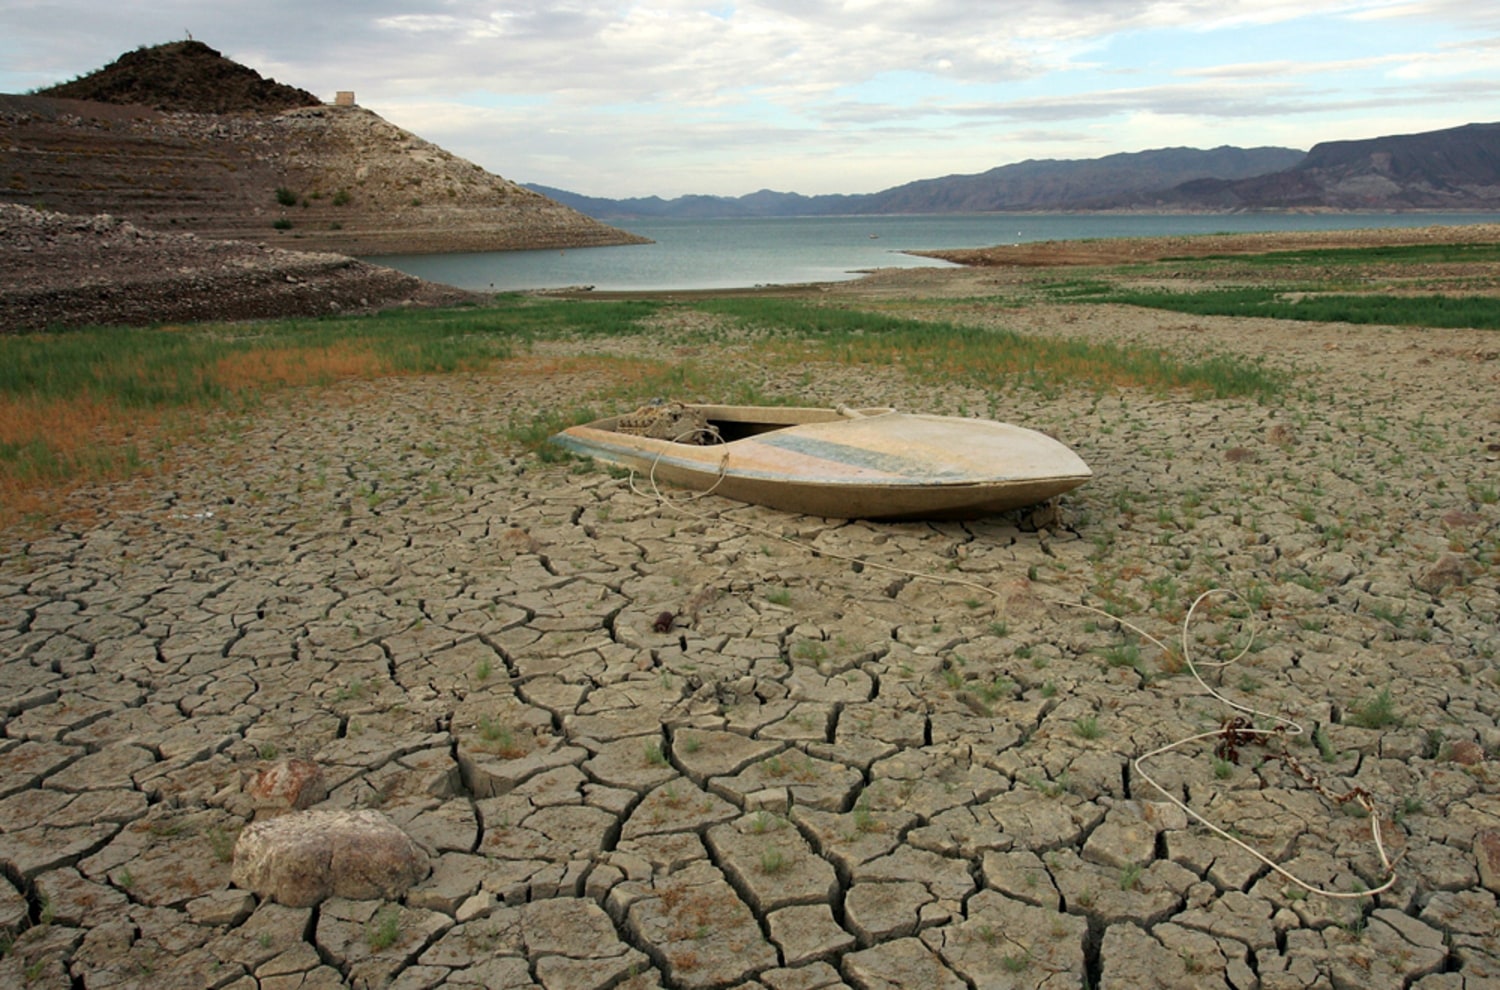 World Groundwater Experts Reveal Depletion Faster Than Predicted